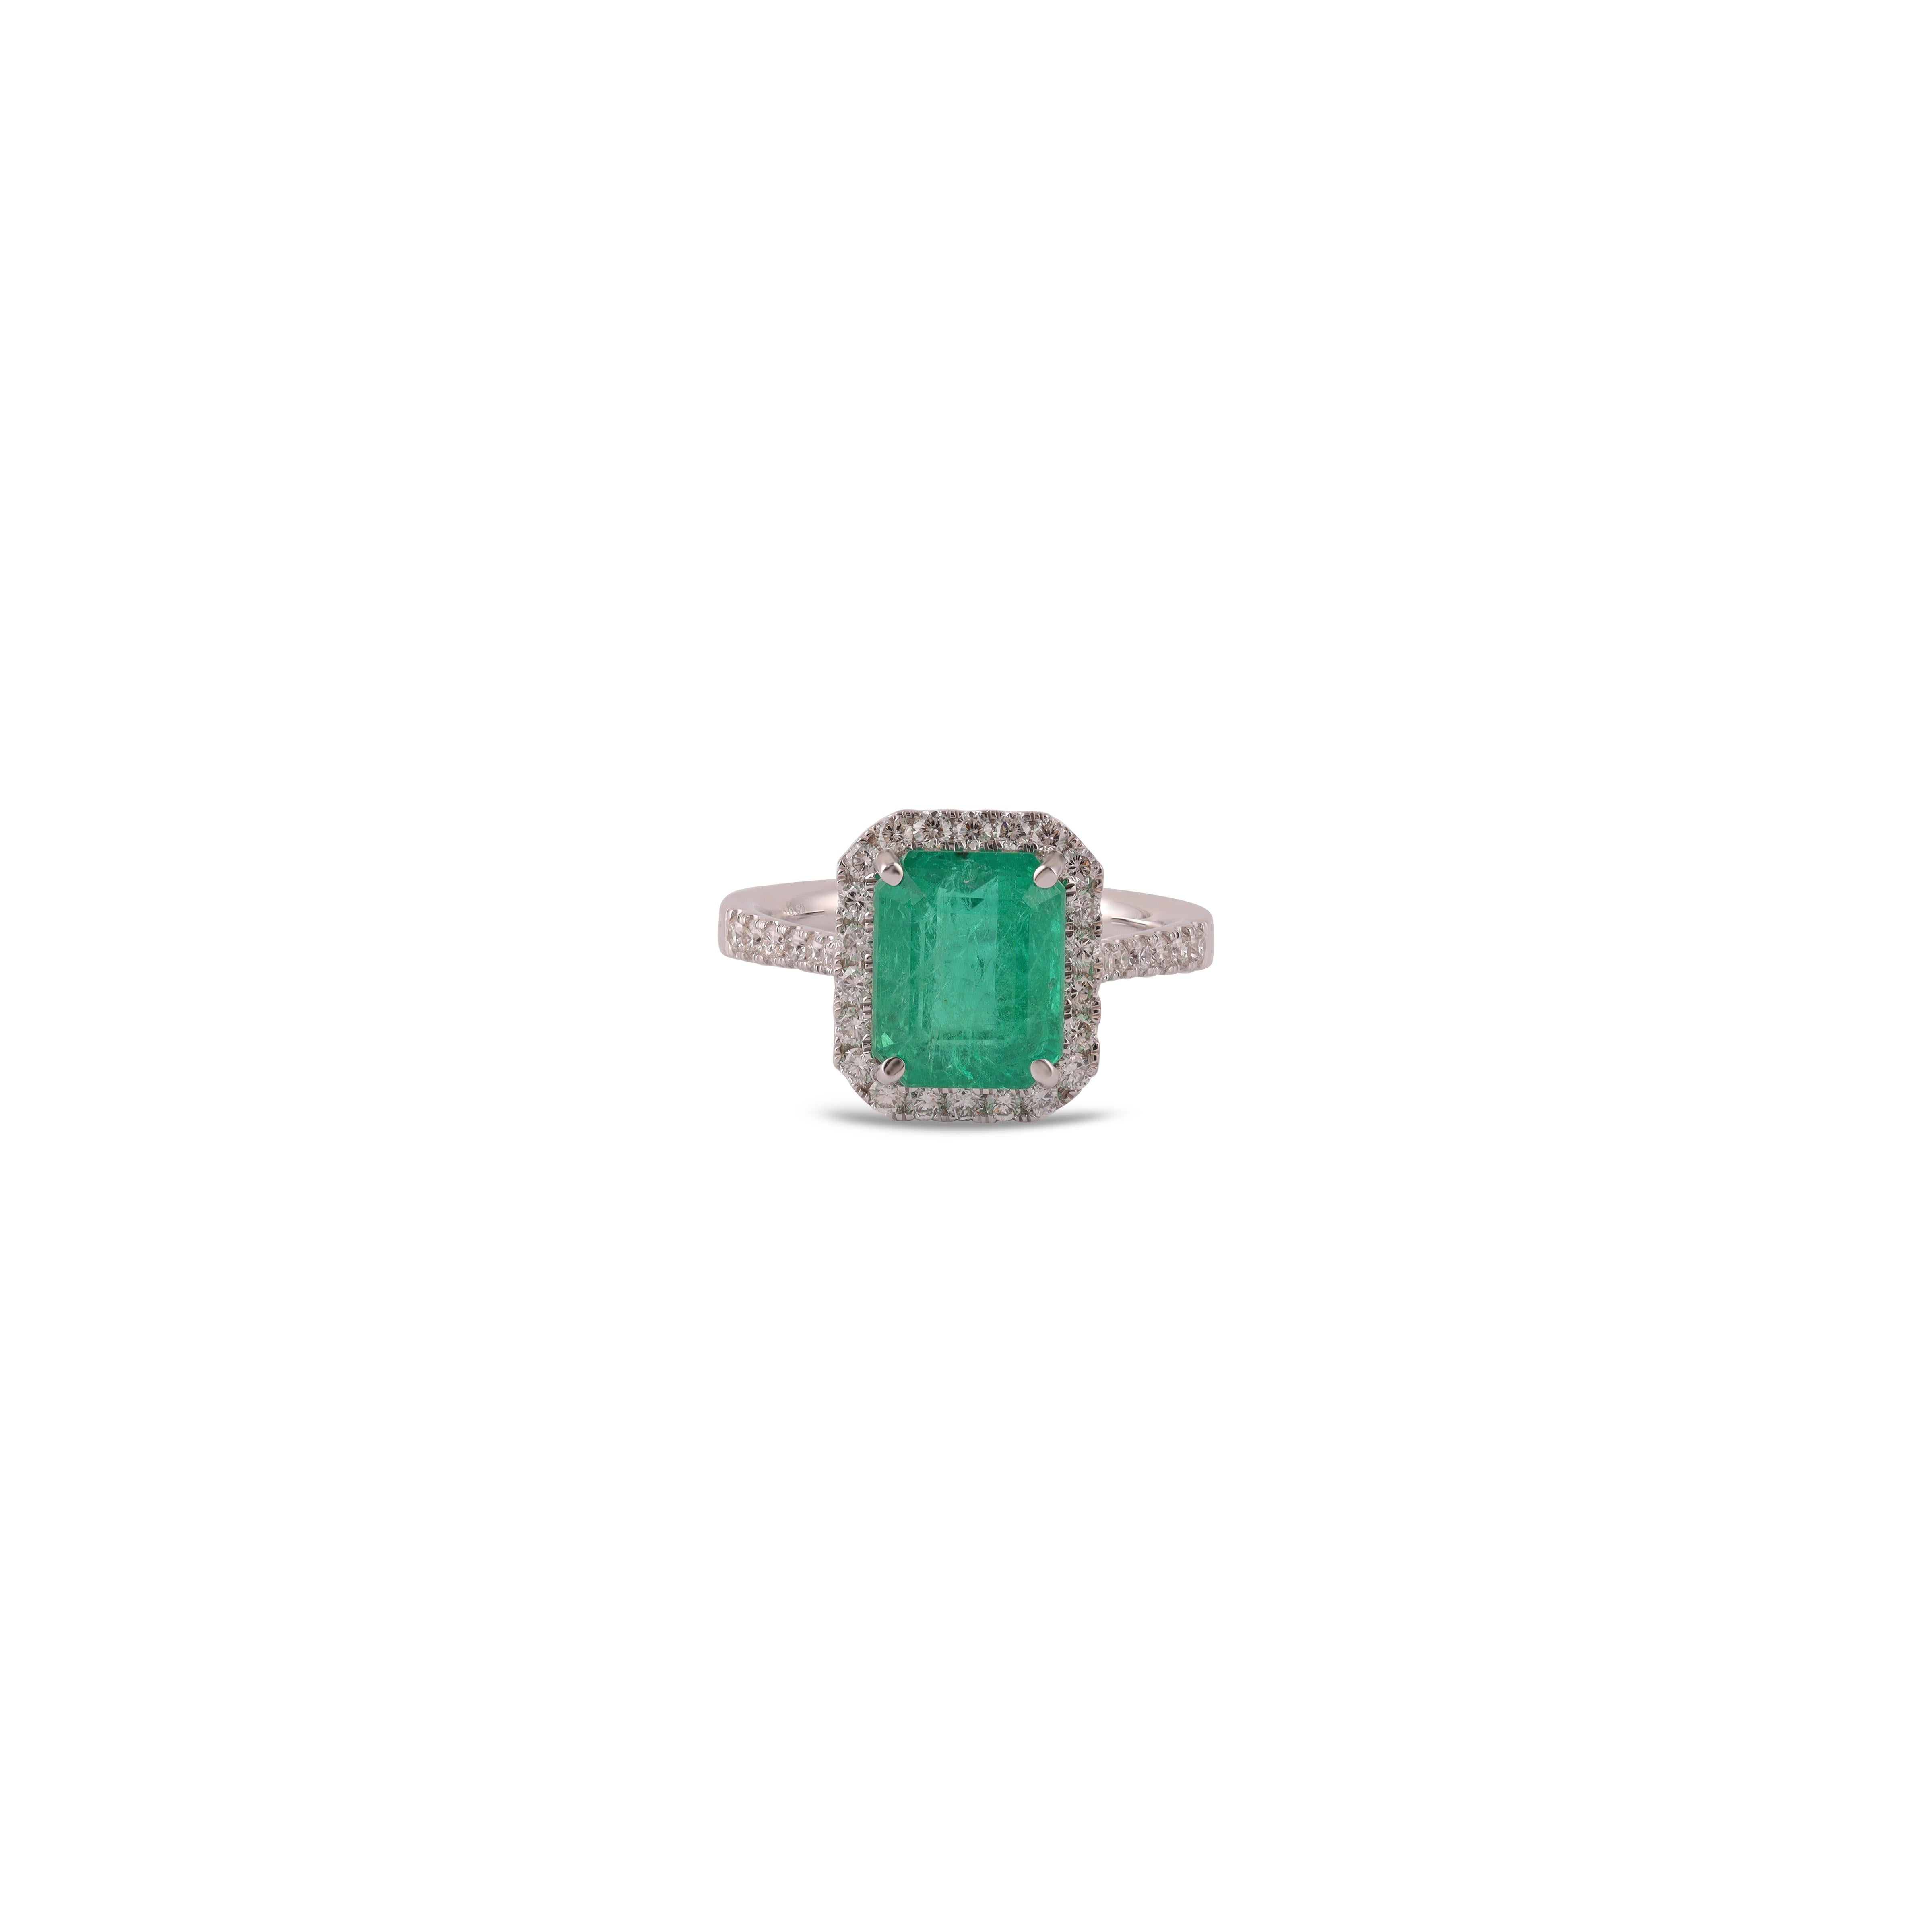 This is an elegant emerald & diamond ring studded in 18k White gold with 1 piece of  Zambian emerald weight 3.94 carat which is surrounded by 36 pieces of round shaped diamonds weight 0.60 carat with this entire ring studded in 18k White gold 

